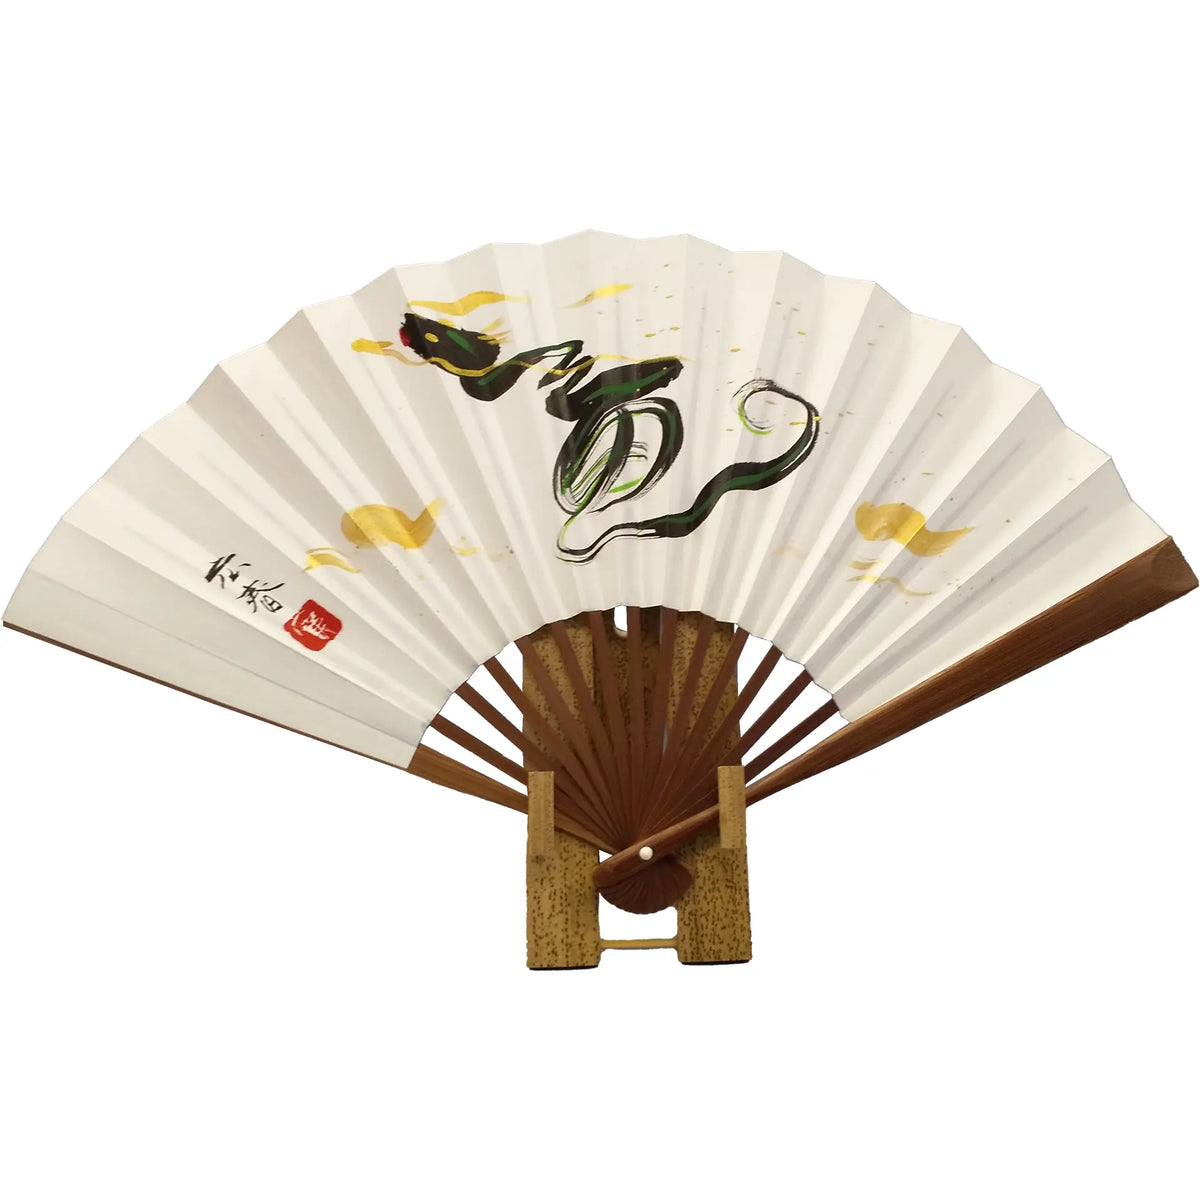 Deadline extended until November 19: Limited to 30 Hirosharu Masunaga zodiac hand-painted fans "made-to-order".